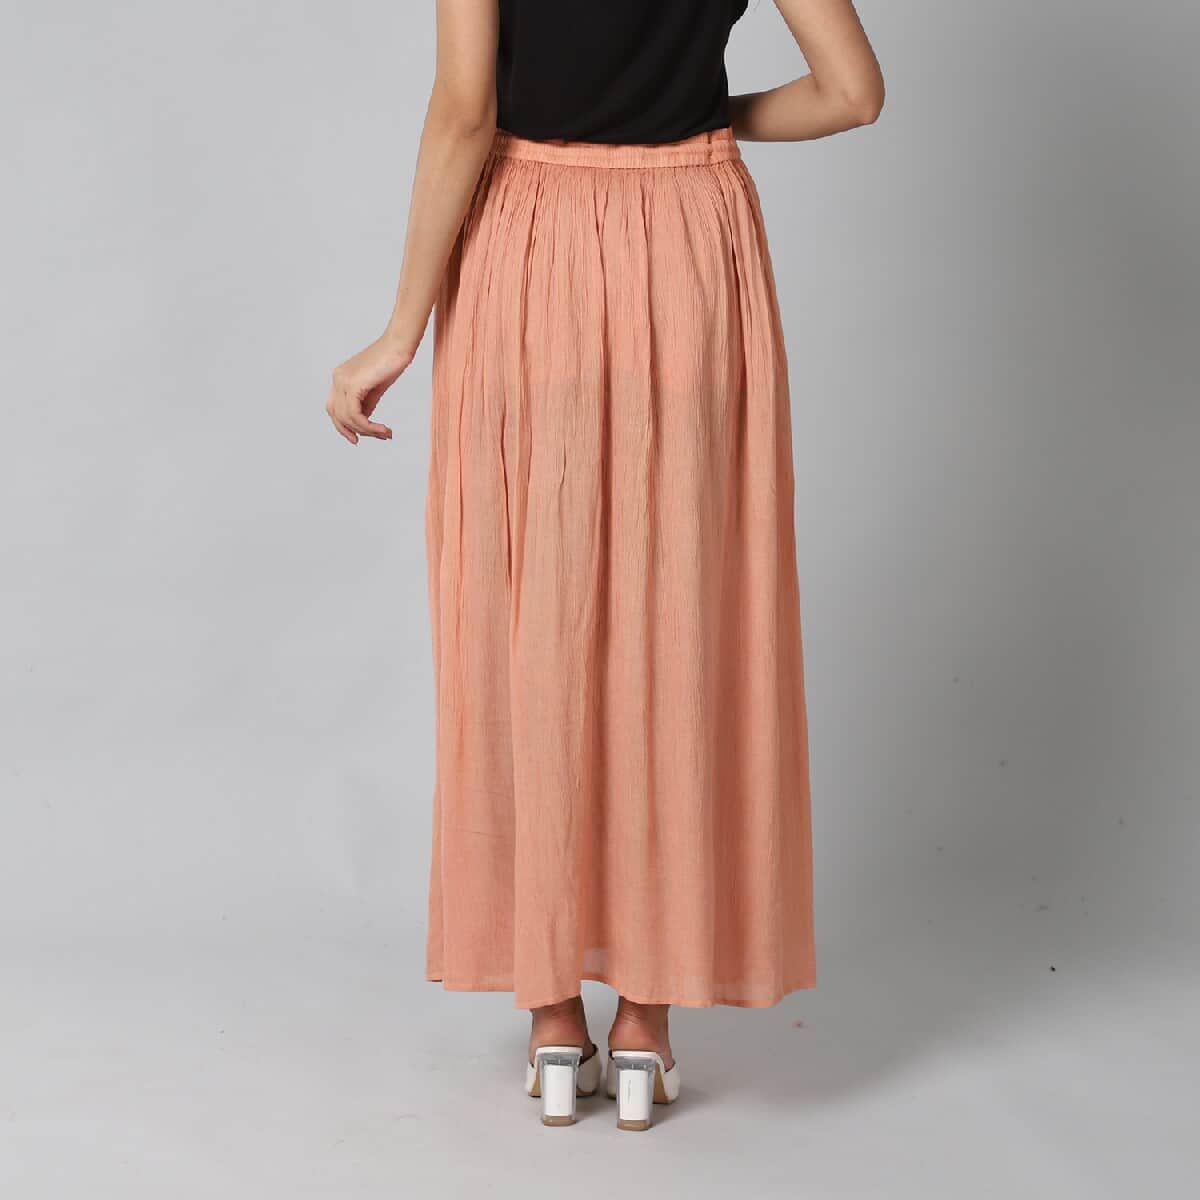 JOVIE Blush 2-Way Solid Skirt Dress (One Size Fits Most) image number 1